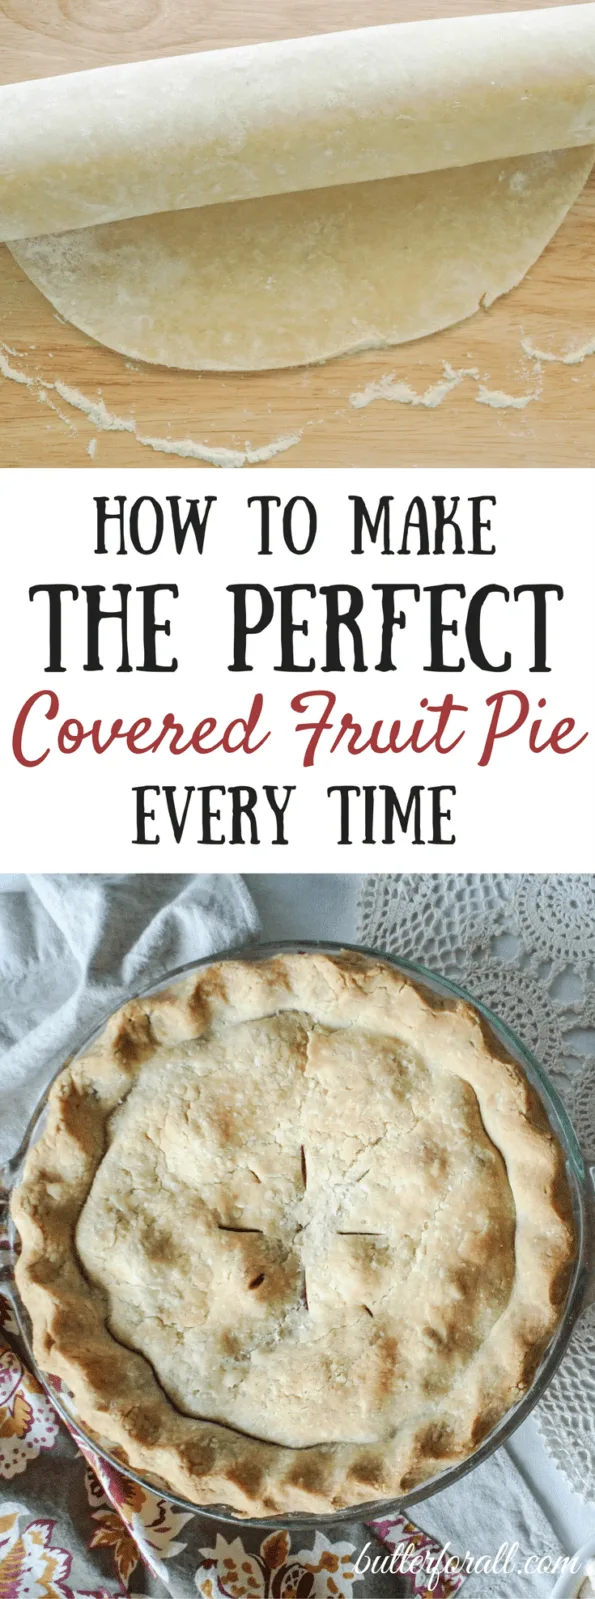 How To Make The Perfect Covered Fruit Pie 